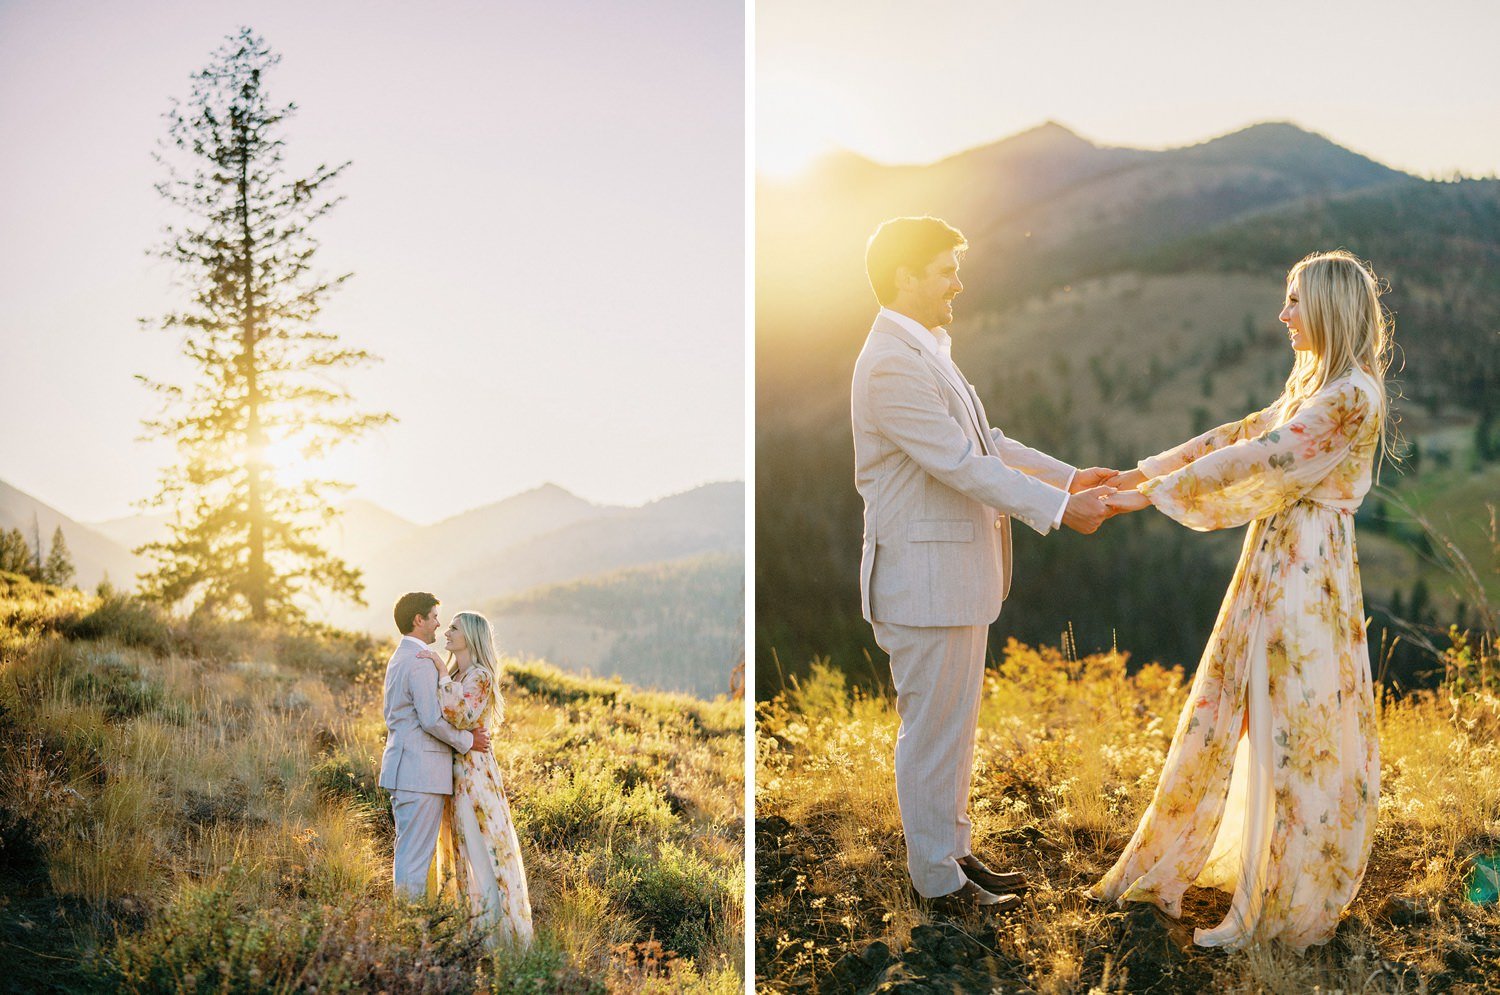 004_Adventurous engagement session in the mountains of Winthrop, by top Washington wedding and elopement photographer .jpg